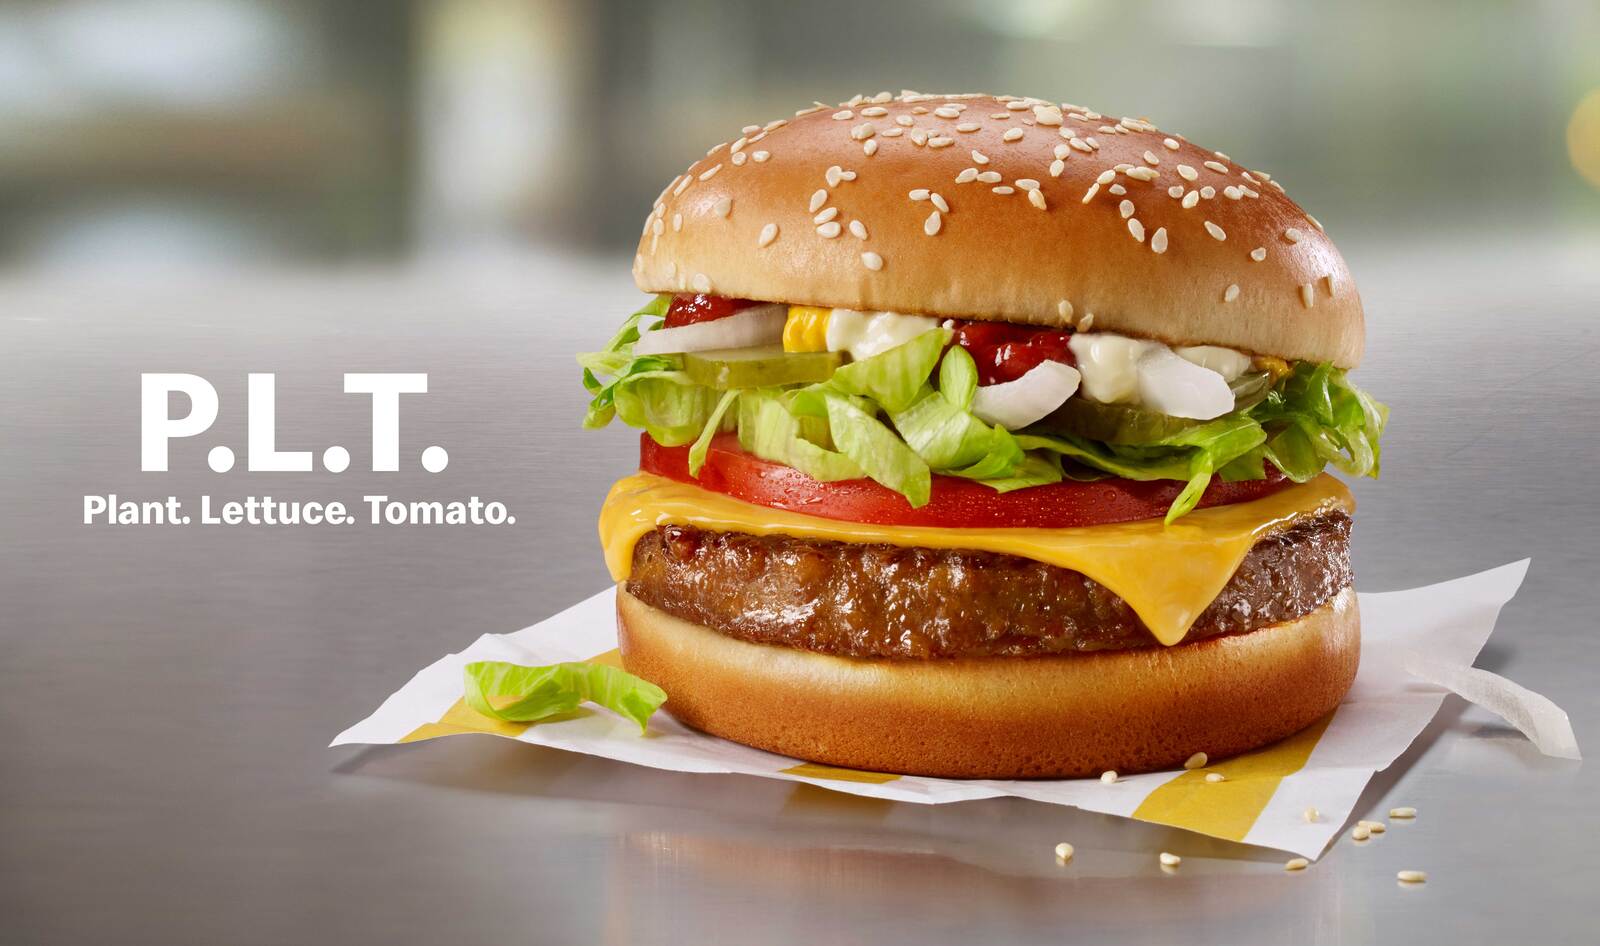 McDonald’s Nearly Doubles Its Meatless Beyond Burger Trial in Canada